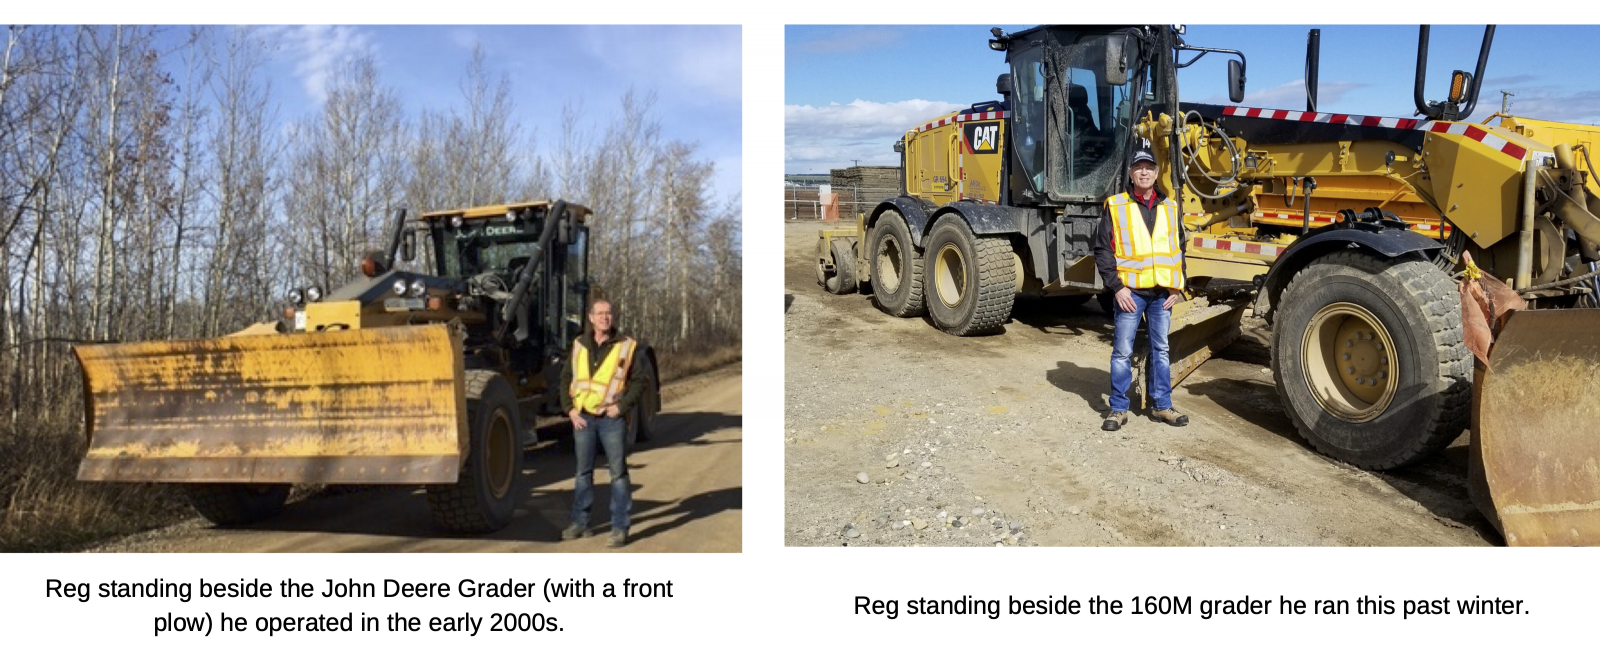 Image 1 - Reg standing beside a John Deere Grader in the early 2000s, Image 2 - Reg standing next to a 160M